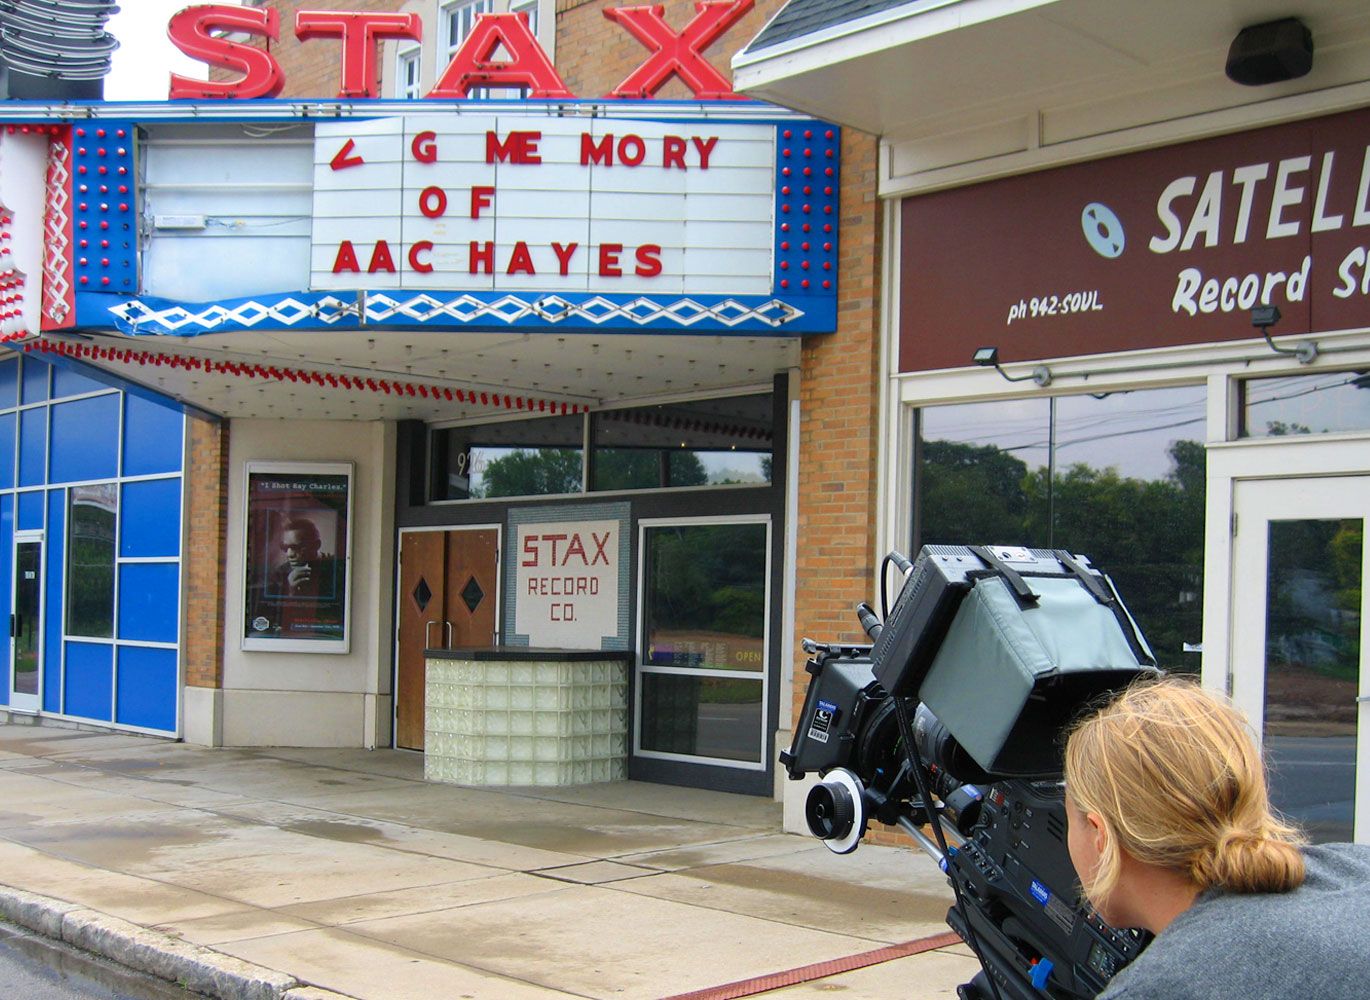 The Stax Museum of American Soul Music, former home of Stax Records, in Memphis, Tennessee.